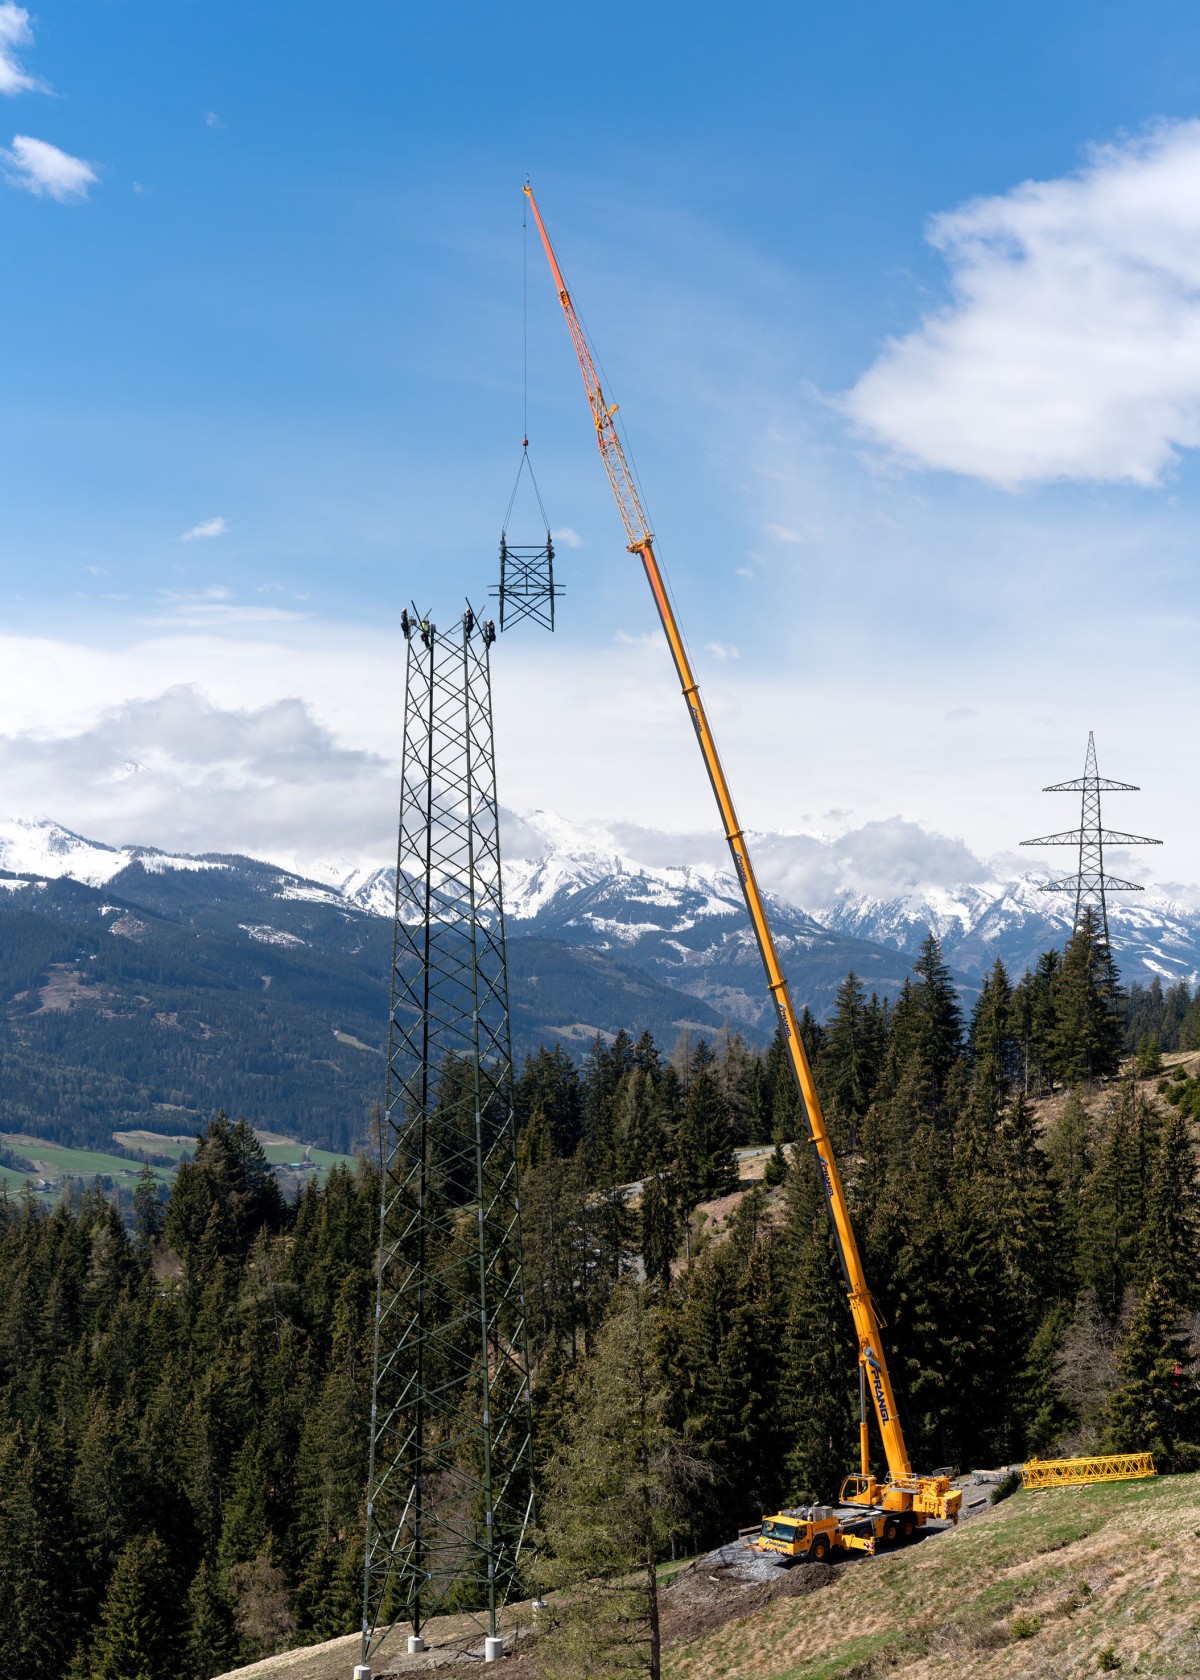 /storage/2021/11/ltm-1160-52-working-on-important-power-line-on-the-edge-of-the-austrian-alps_61926f4ad3870.jpg